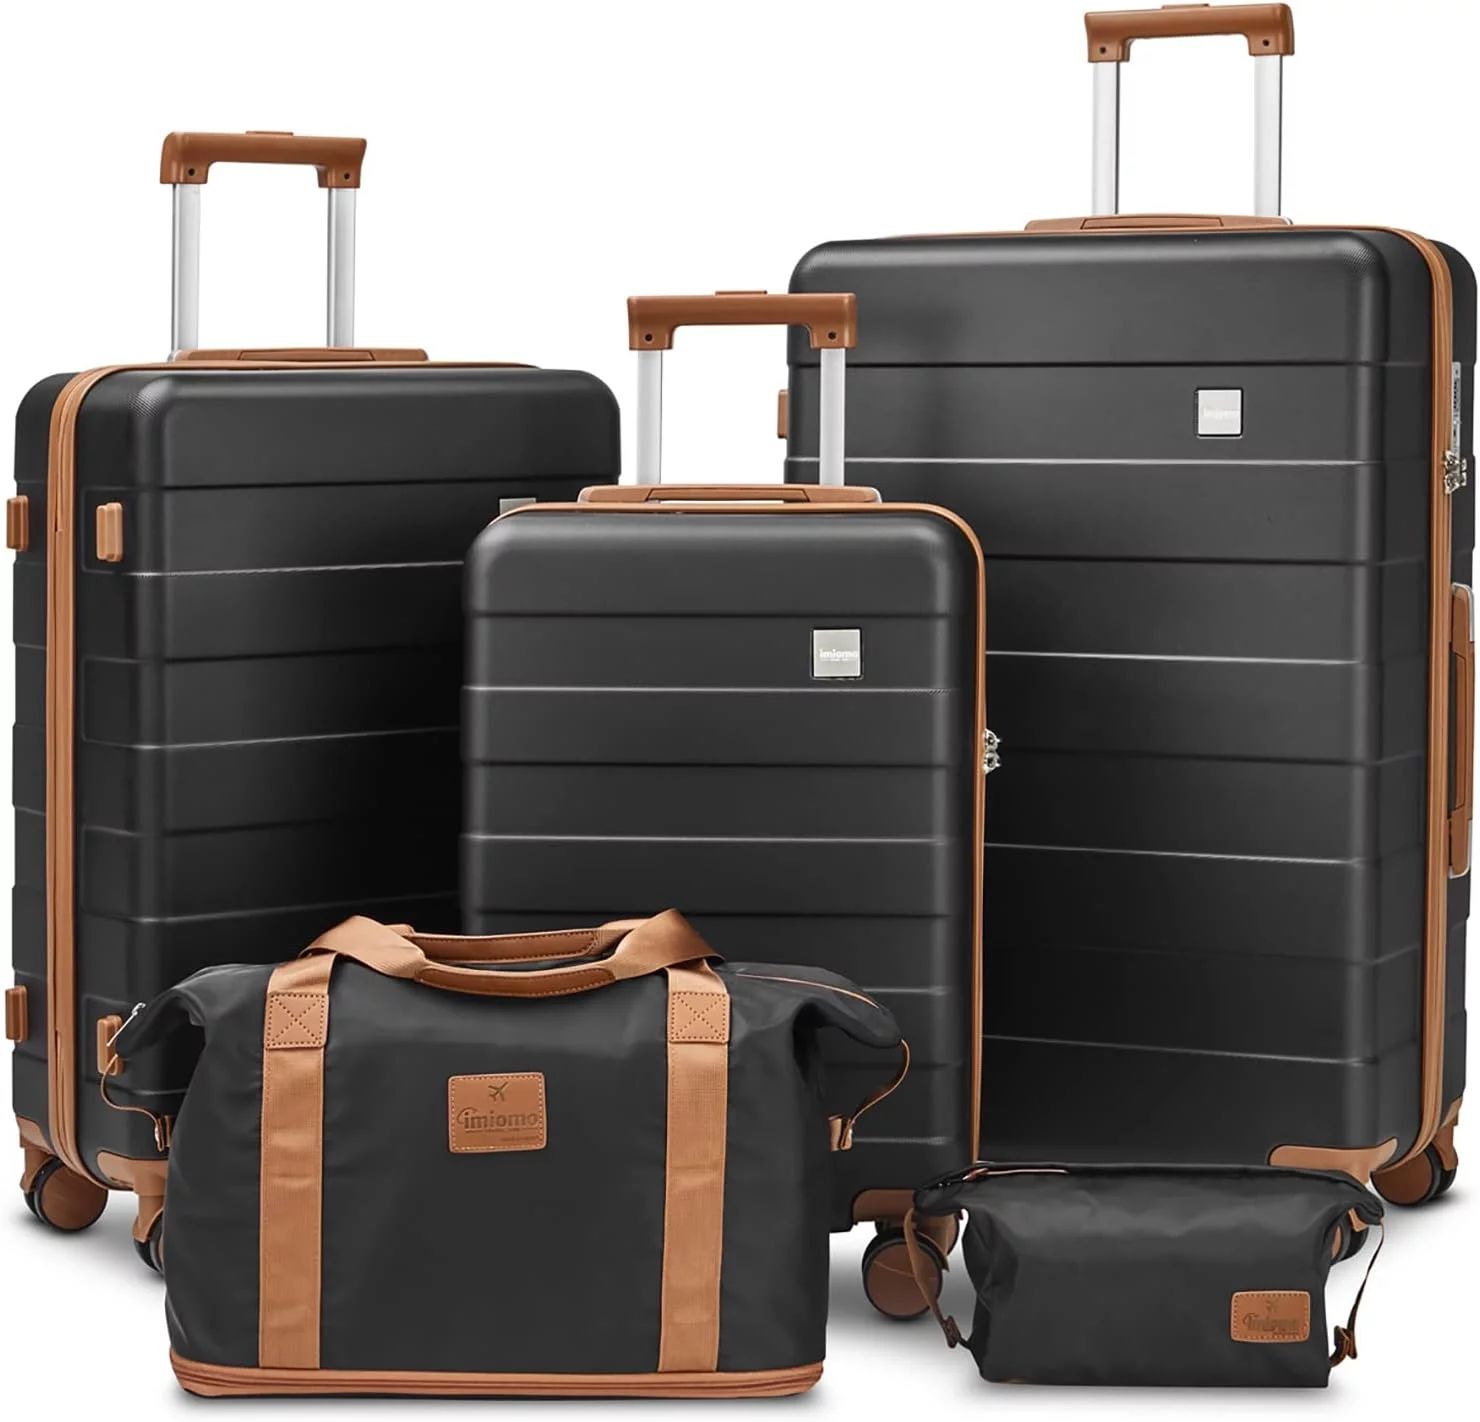 imiomo Luggage, ABS Hard Luggage Set with Spinner Wheels, with TSA Lock, Lightweight and Durable ... | Walmart (US)